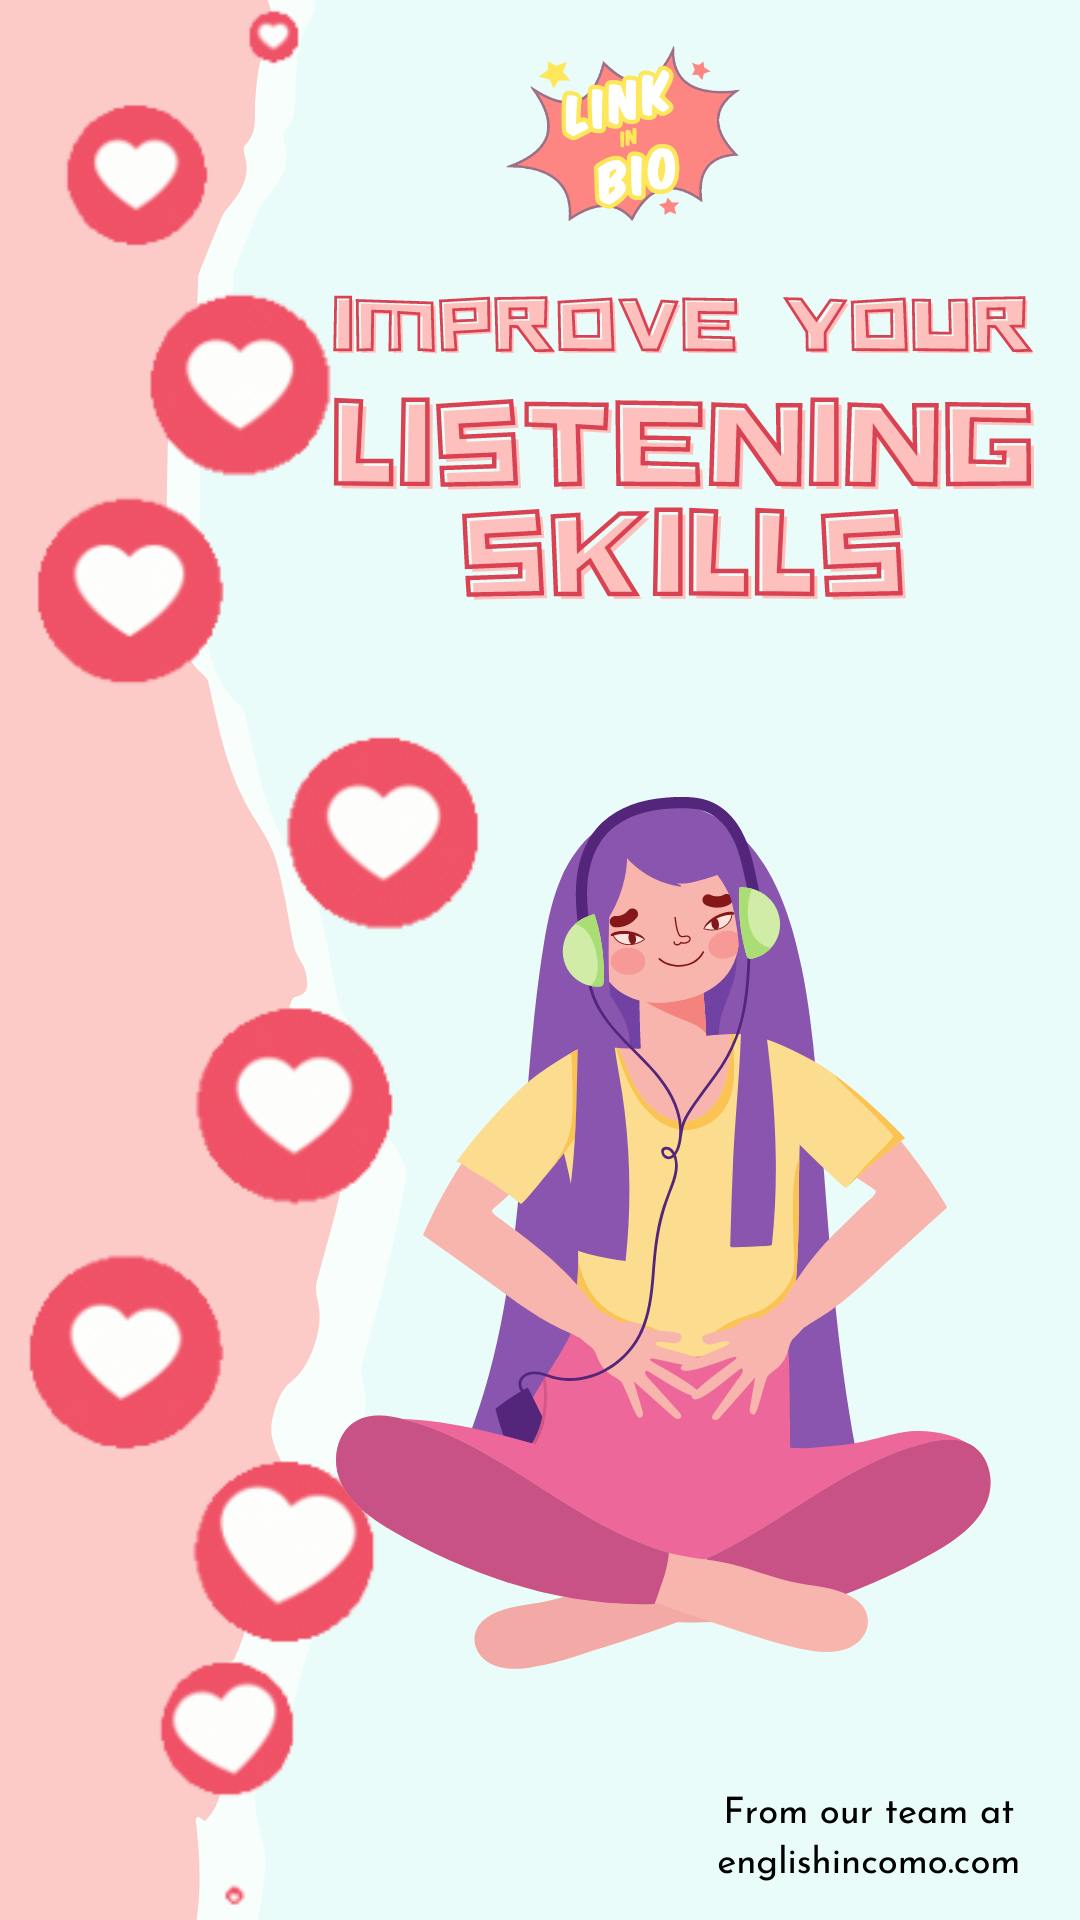 Improve your listening skills with us